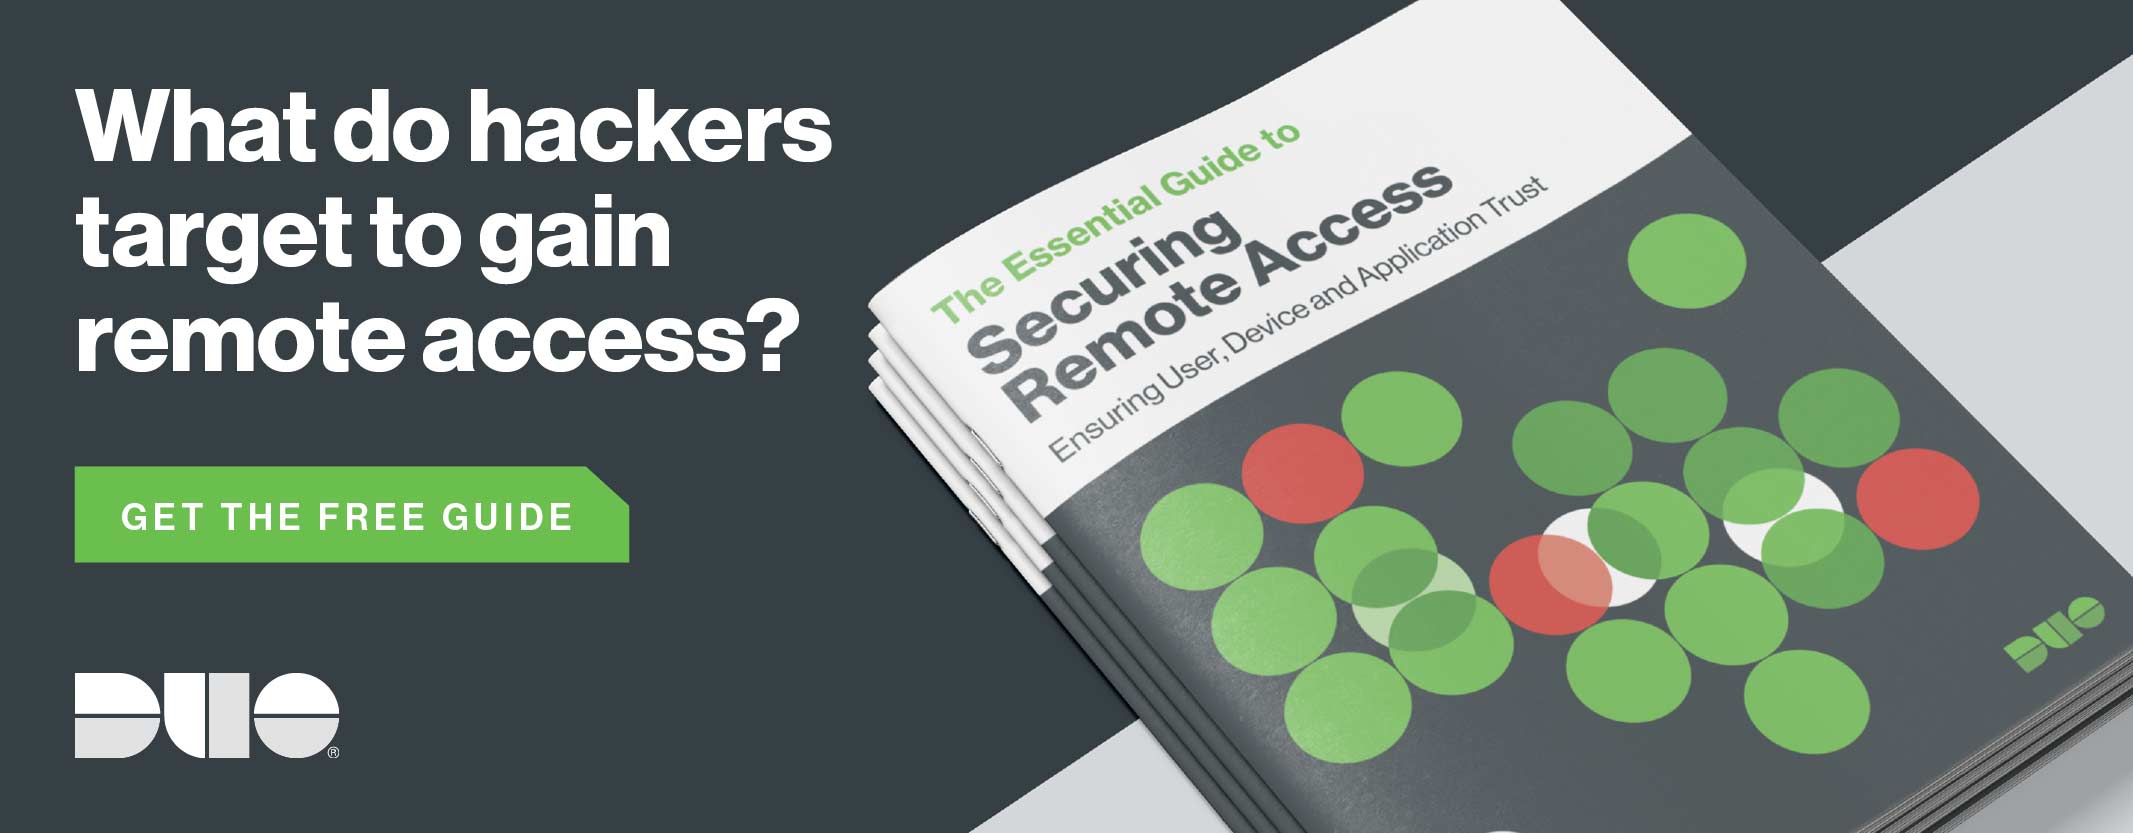 What do hackers target to gain remote access? Get the free guide: The Essential Guide to Securing Remote Access.